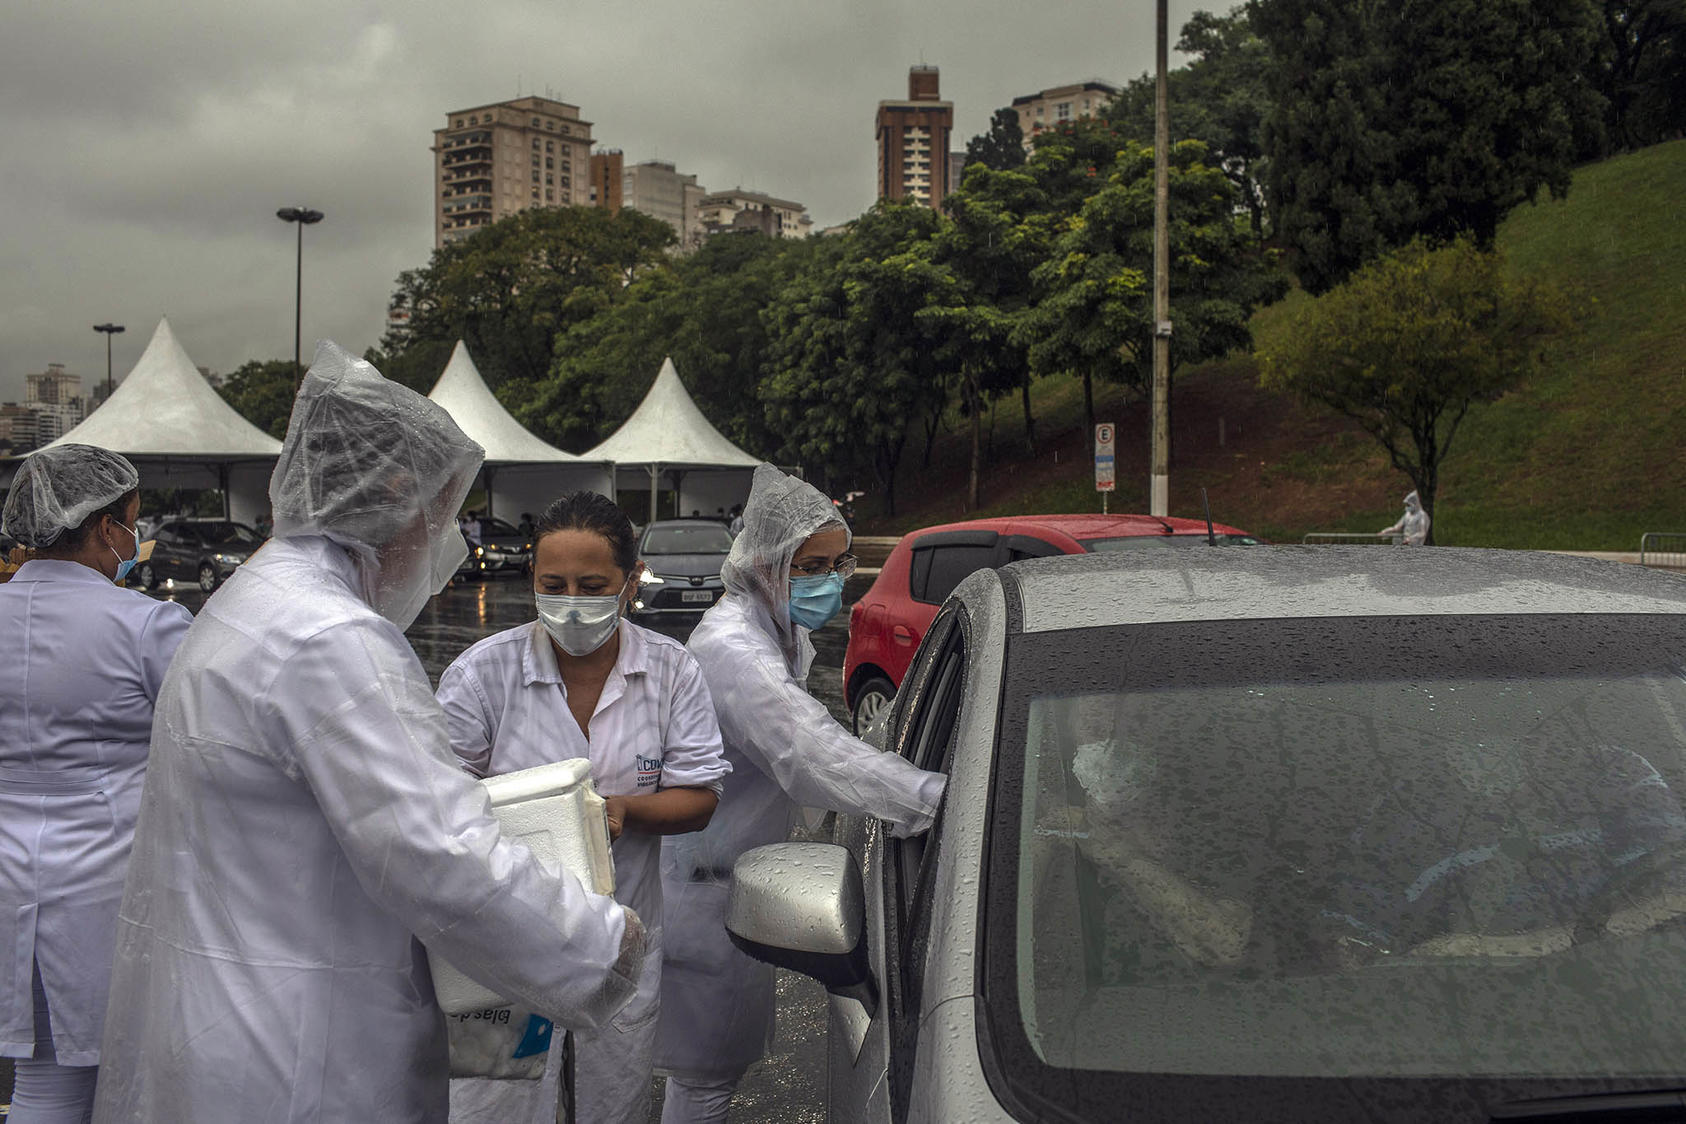 China’s CoronaVac vaccine is administered at a vaccination site in São Paulo, Brazil on Feb. 11, 2021. China provided the second most pandemic assistance to Brazil in Latin America, trailing only Venezuela. (Victor Moriyama/The New York Times)